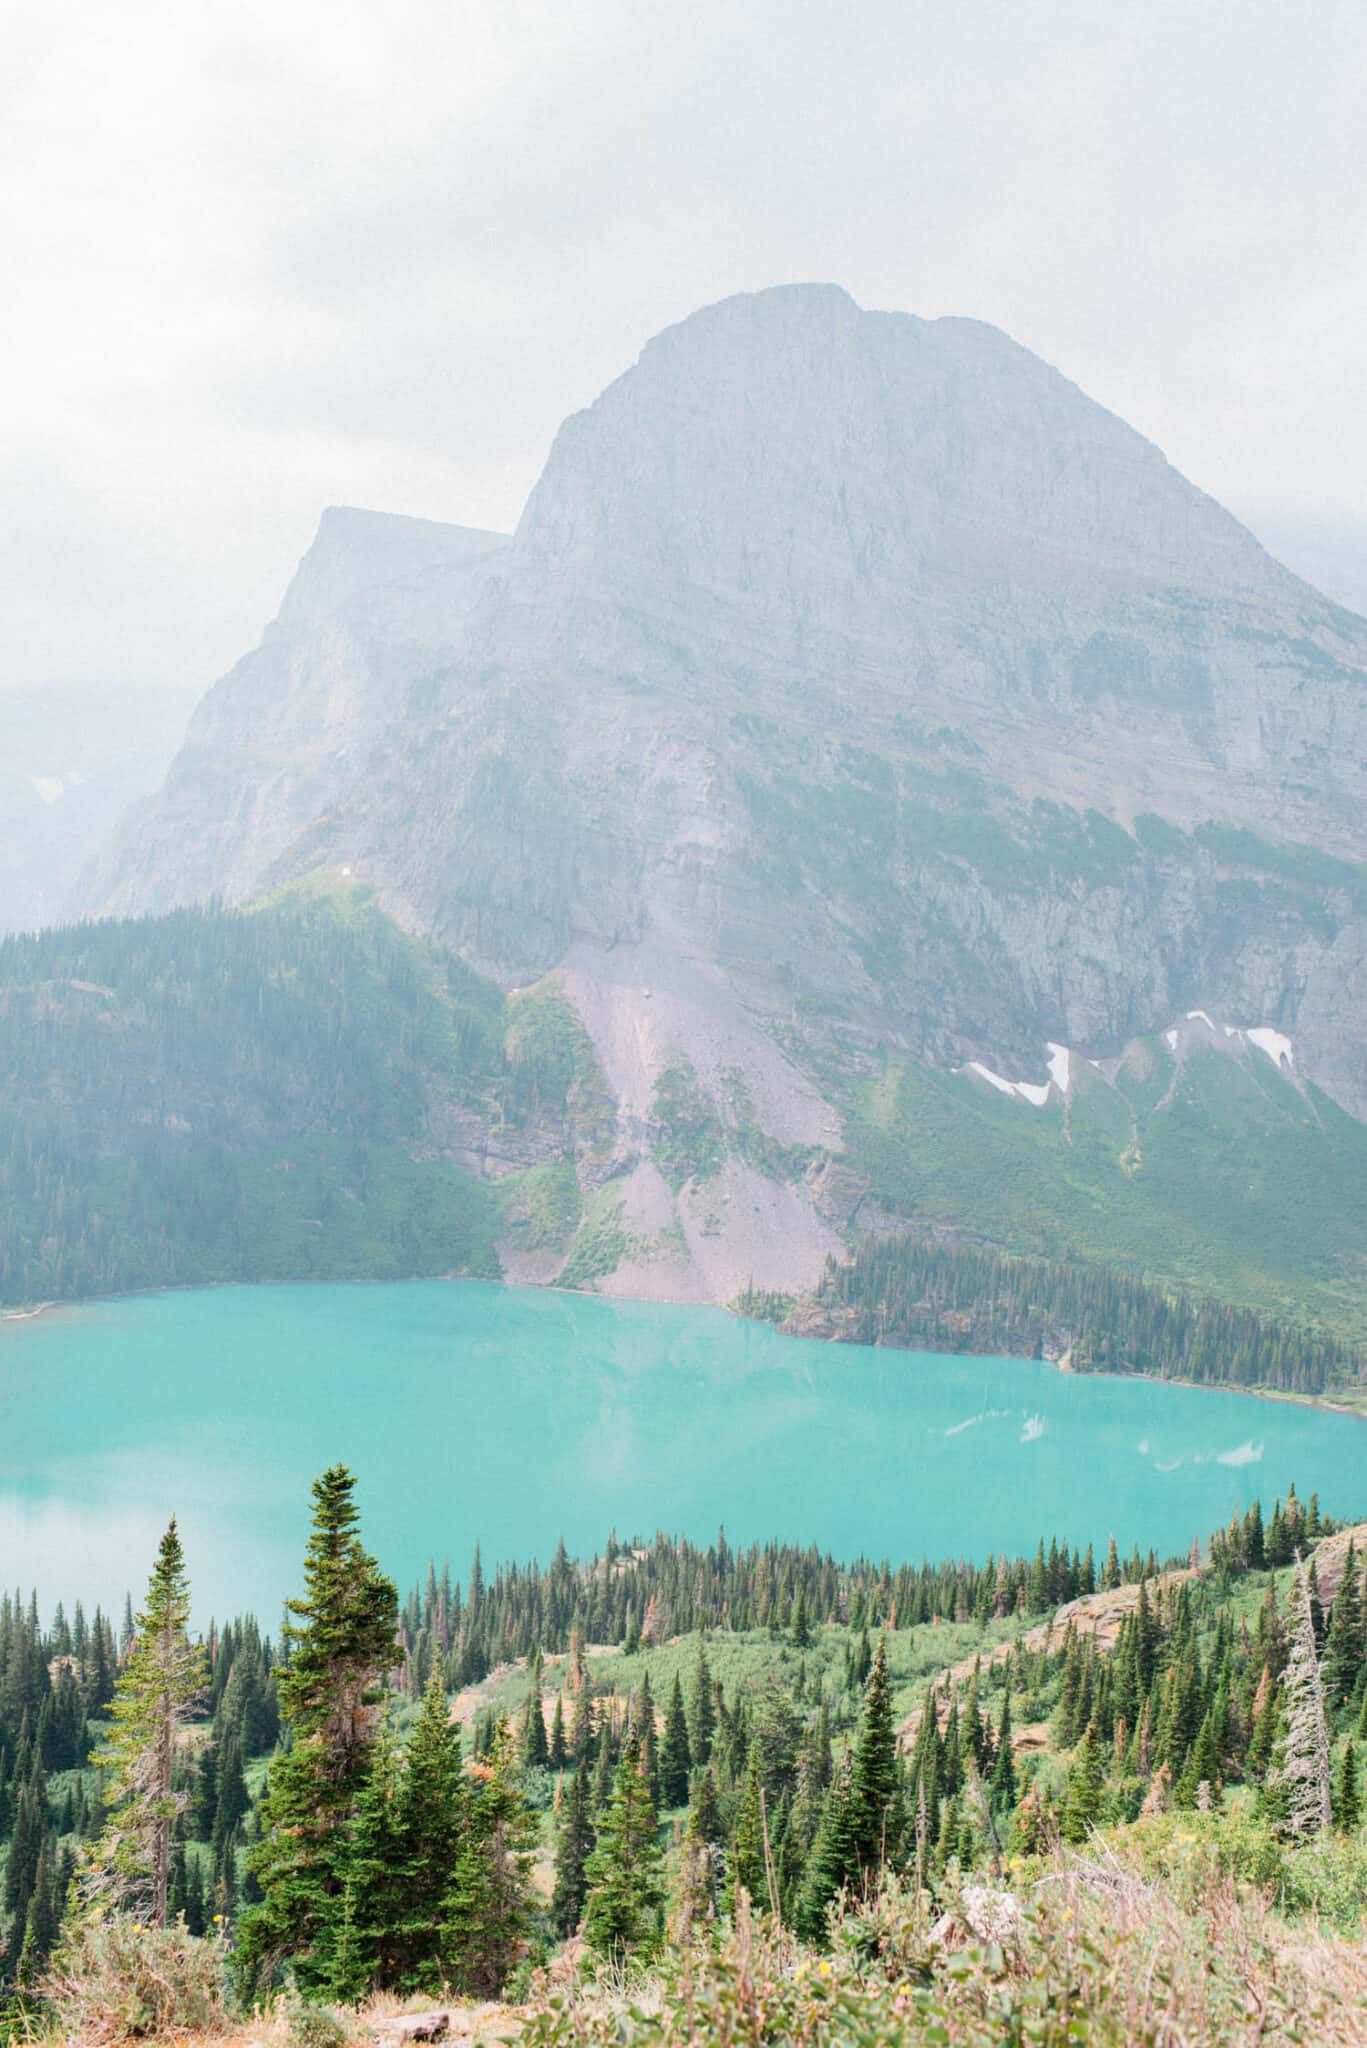 20 Photos to Inspire You to Hike Grinnell Glacier - Catherine Vigen